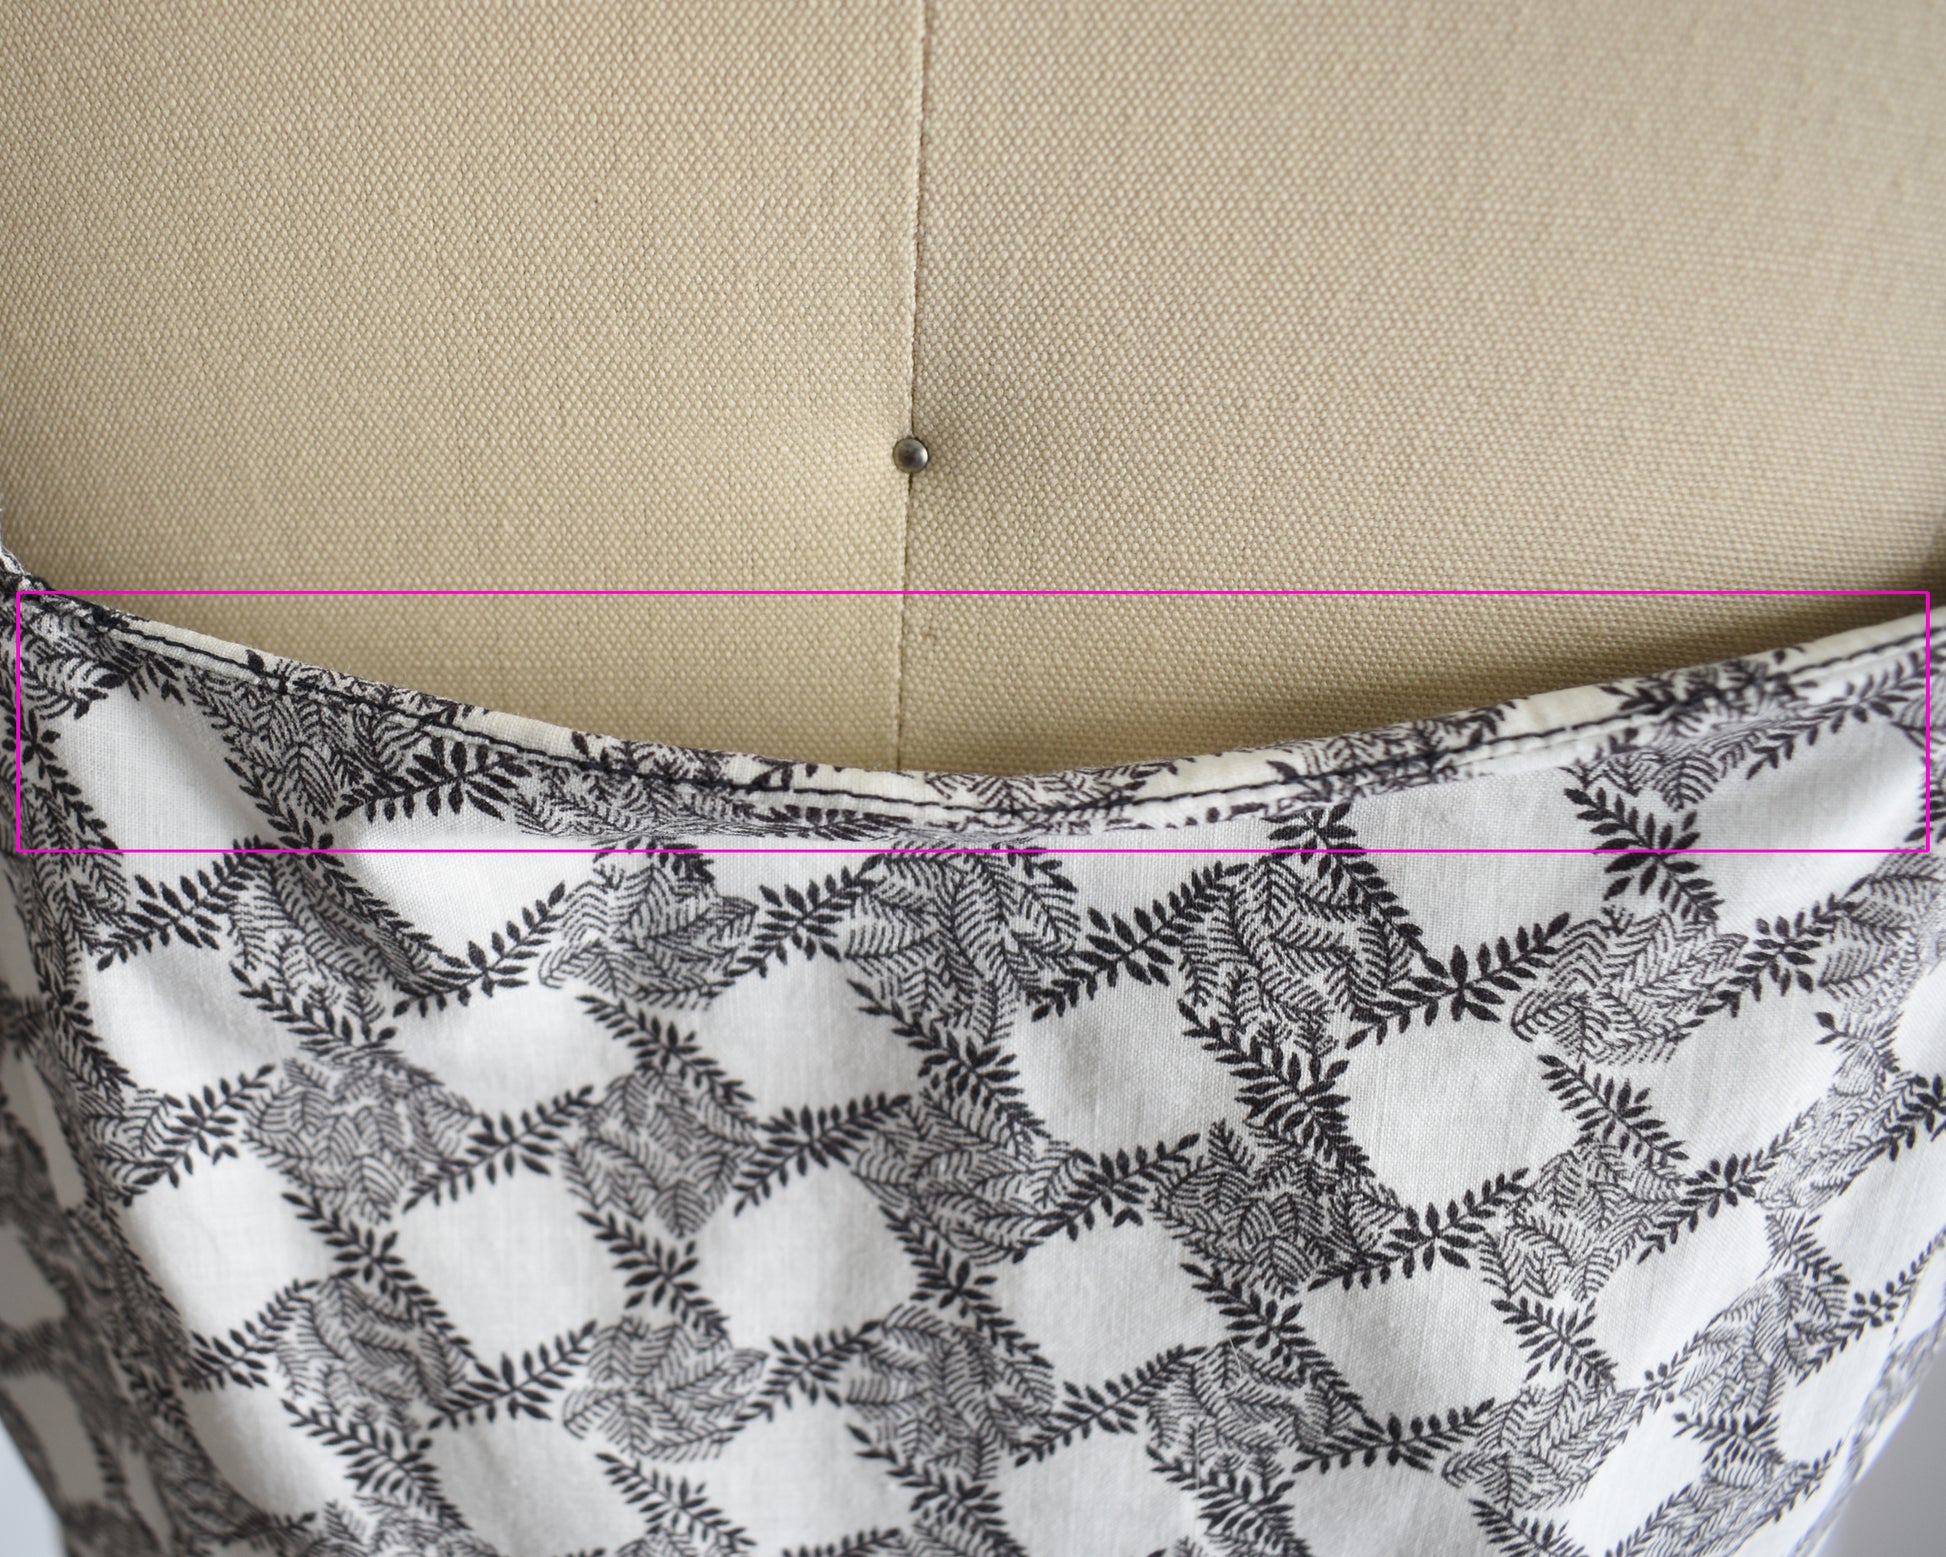 Close up of the back seam which has a slight discolored line